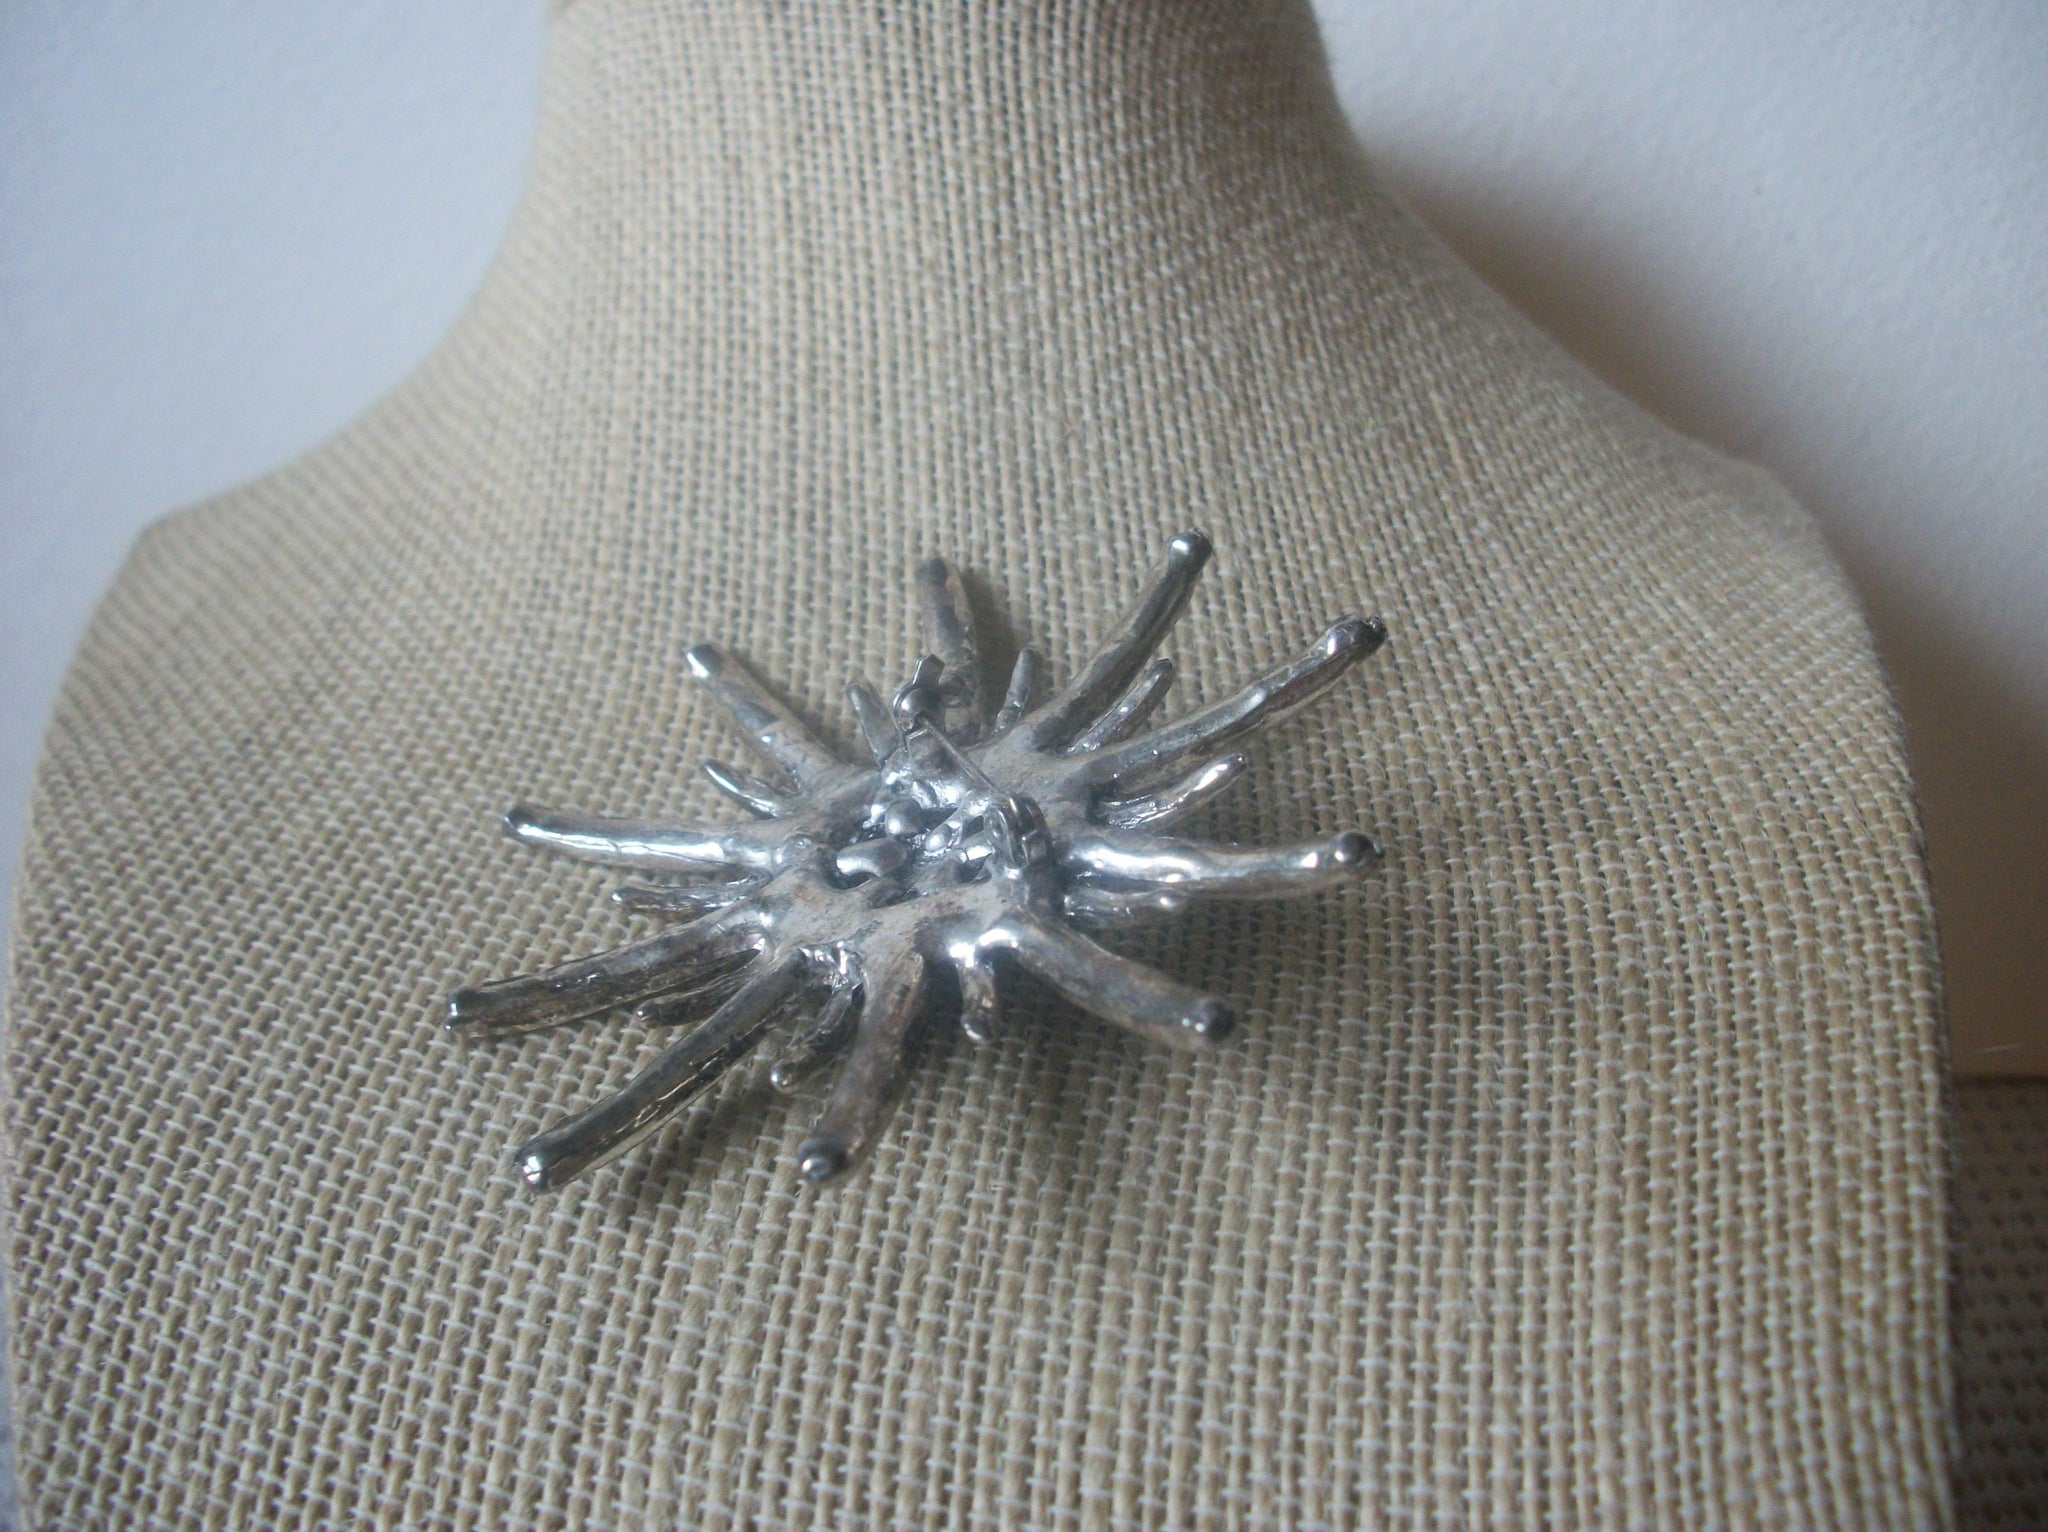 Larger Southwestern Star Silver Tone Blue Micro Beads Vintage Brooch Pin 022221